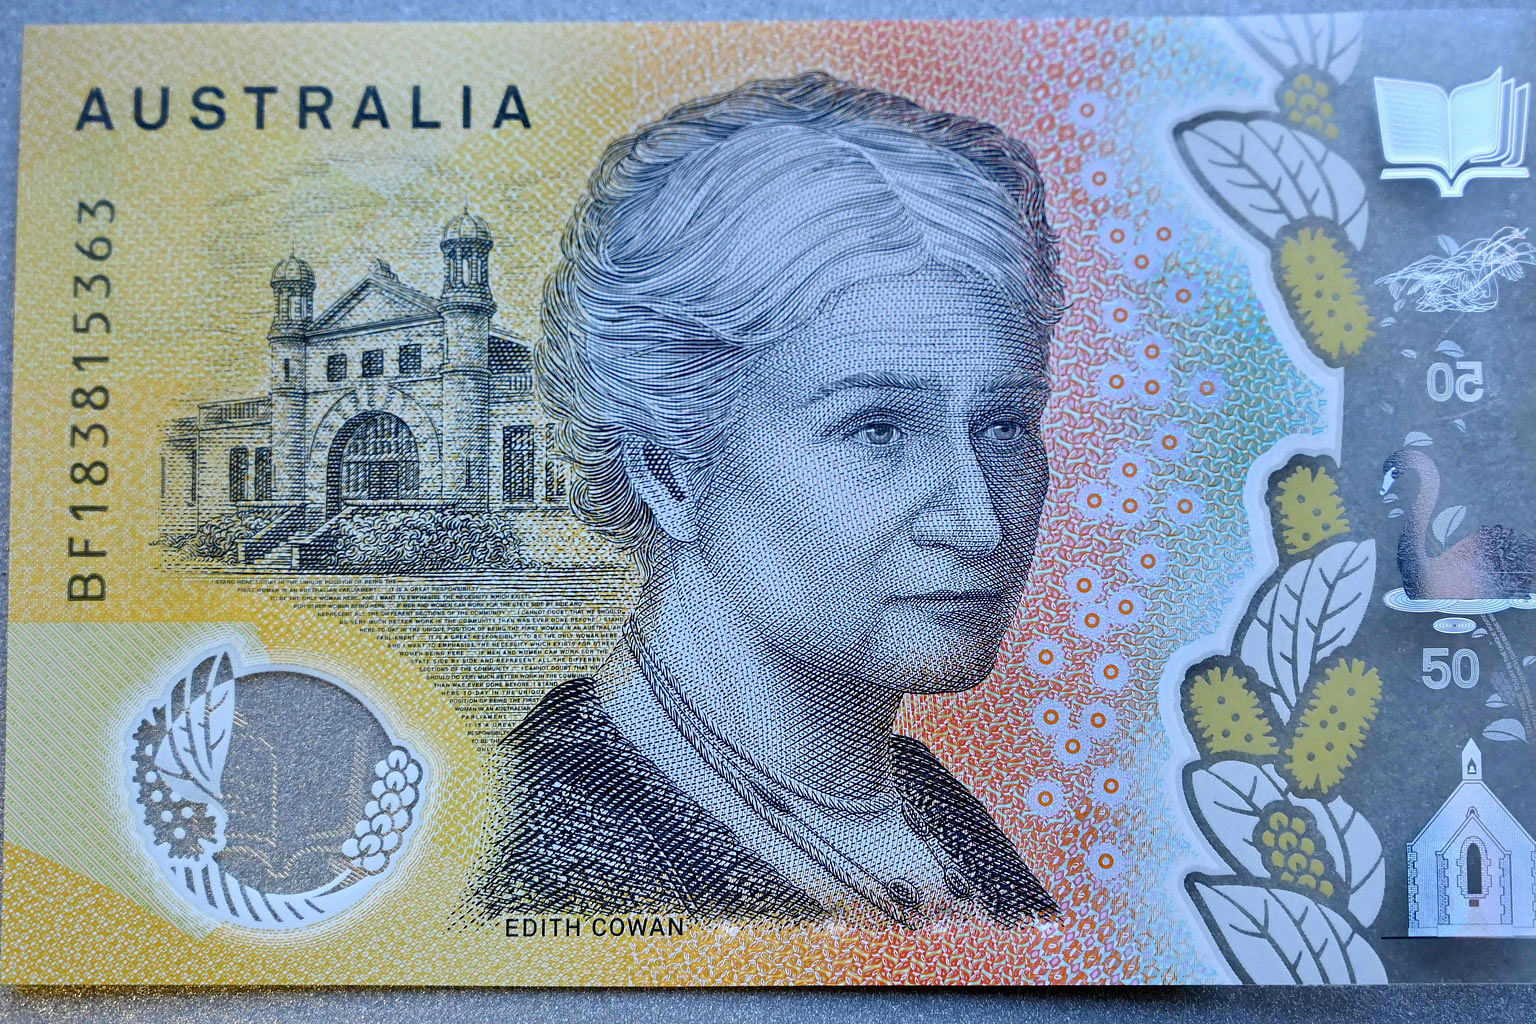 Australia's new $50 banknote. A central bank spokesman said the error will be corrected at the next print run.